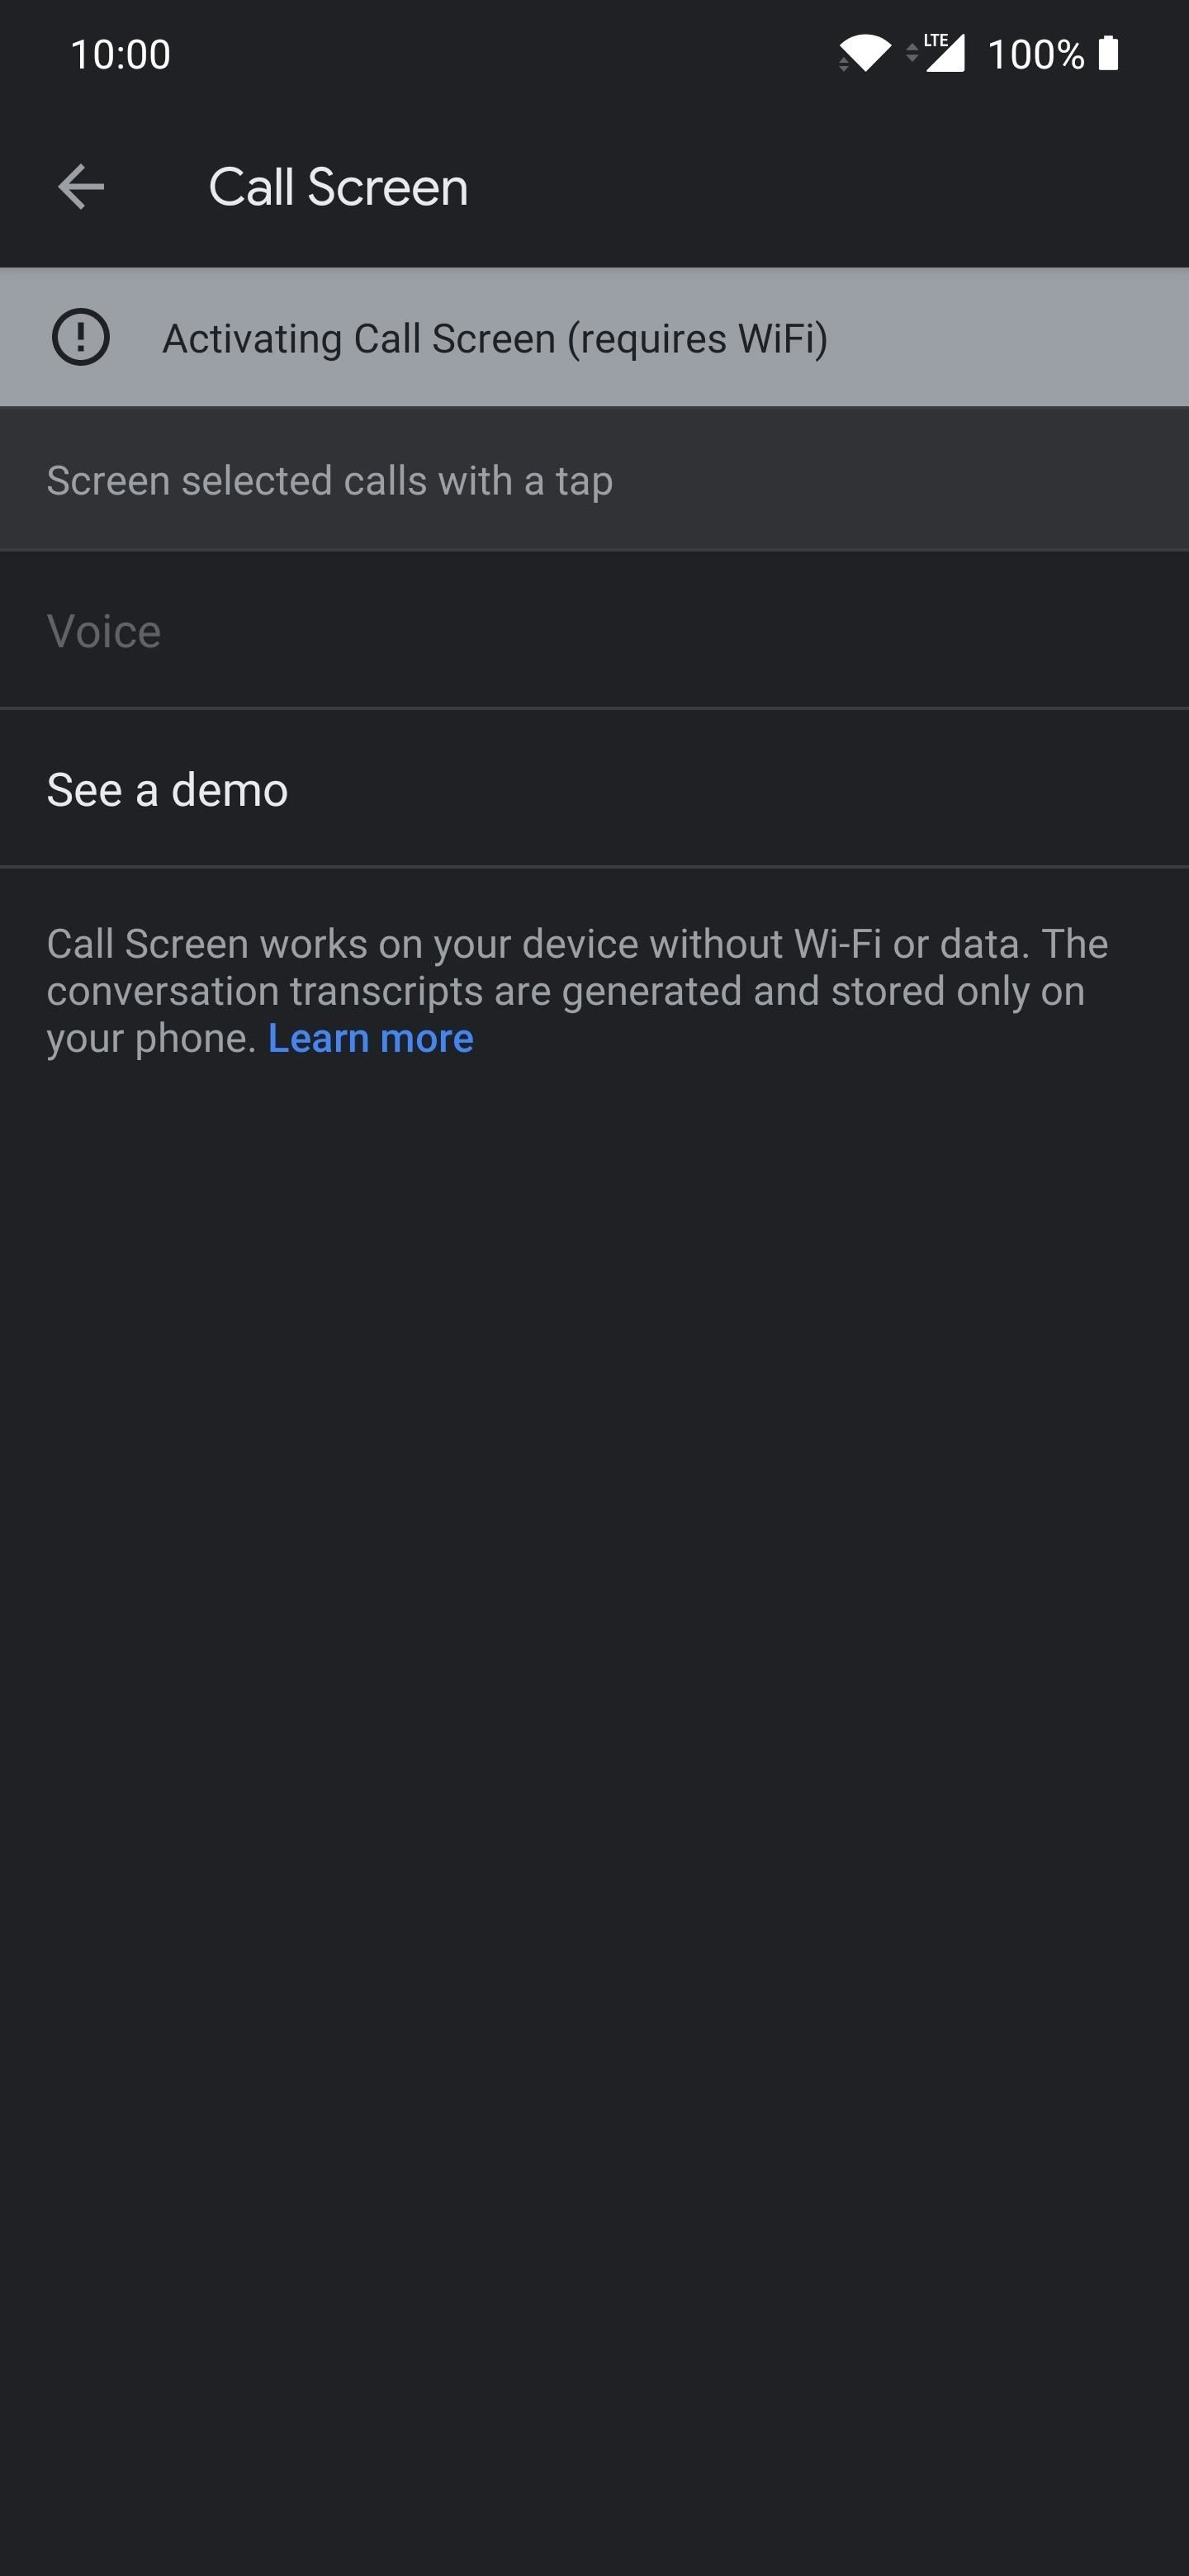 How to Get Google's Call Screen Feature on Your OnePlus